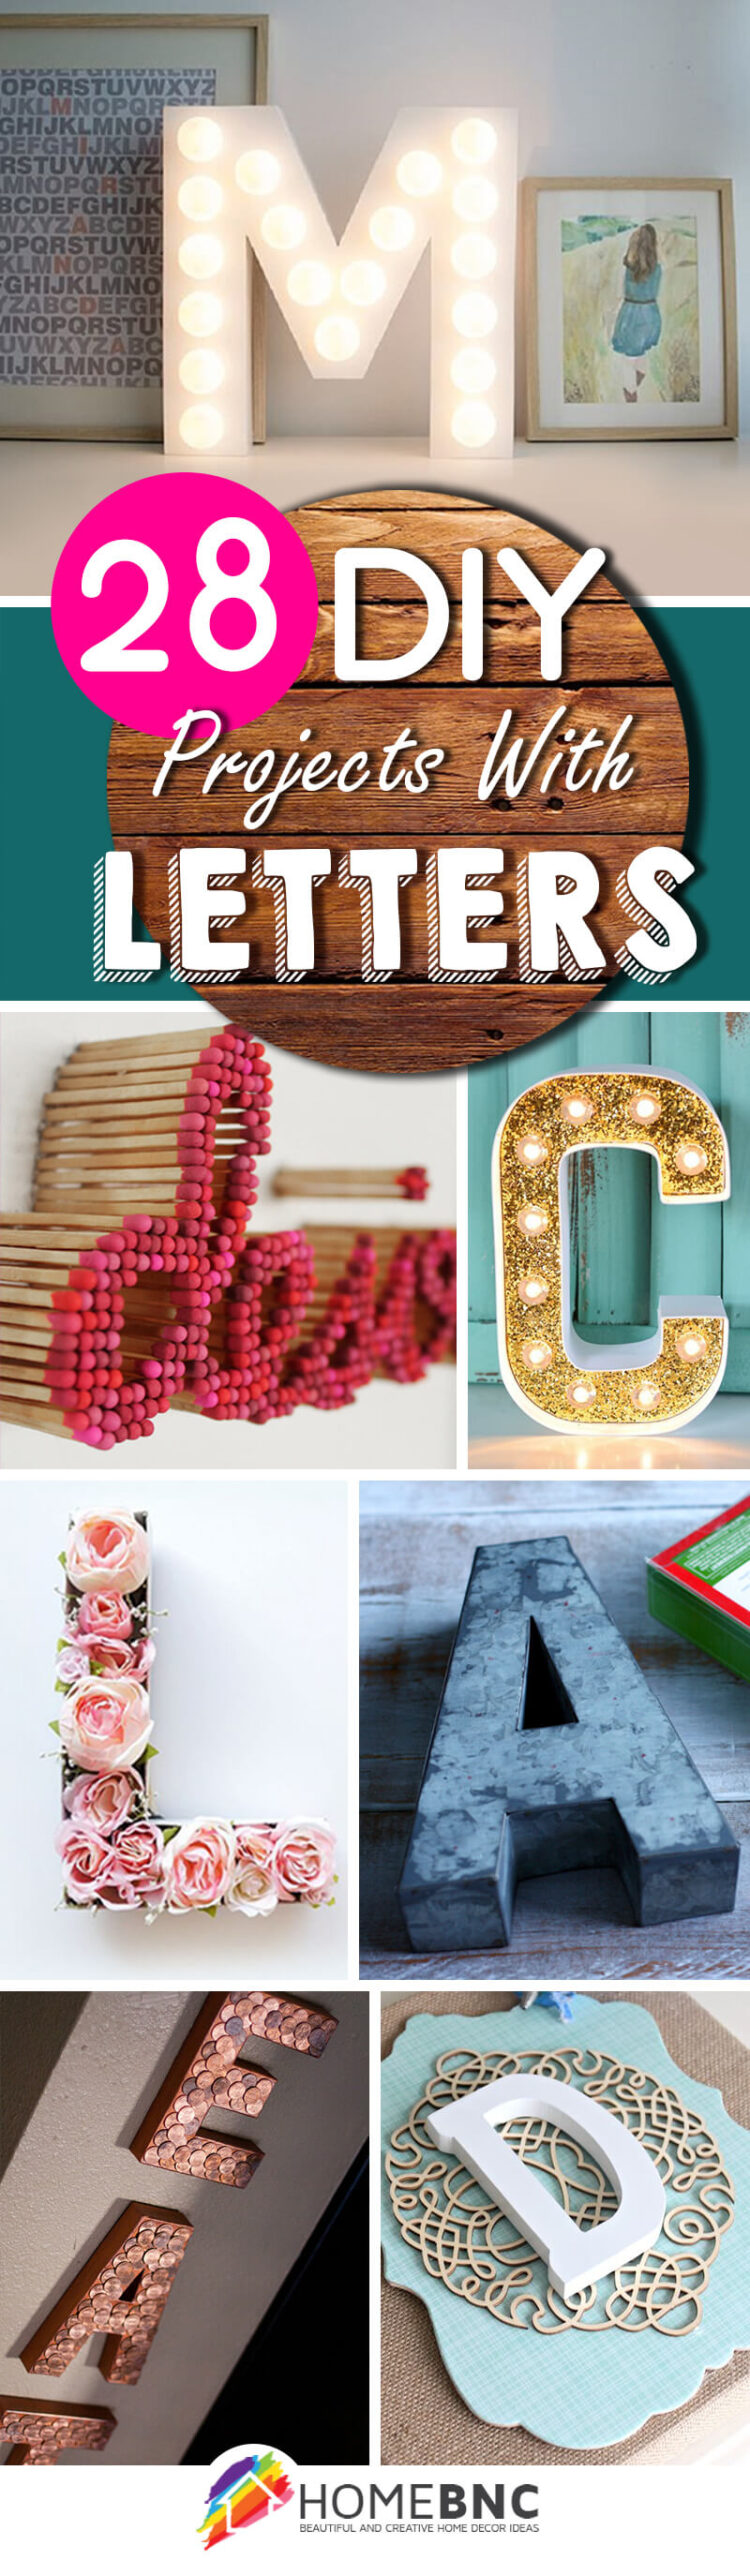 DIY Project Ideas with Letters